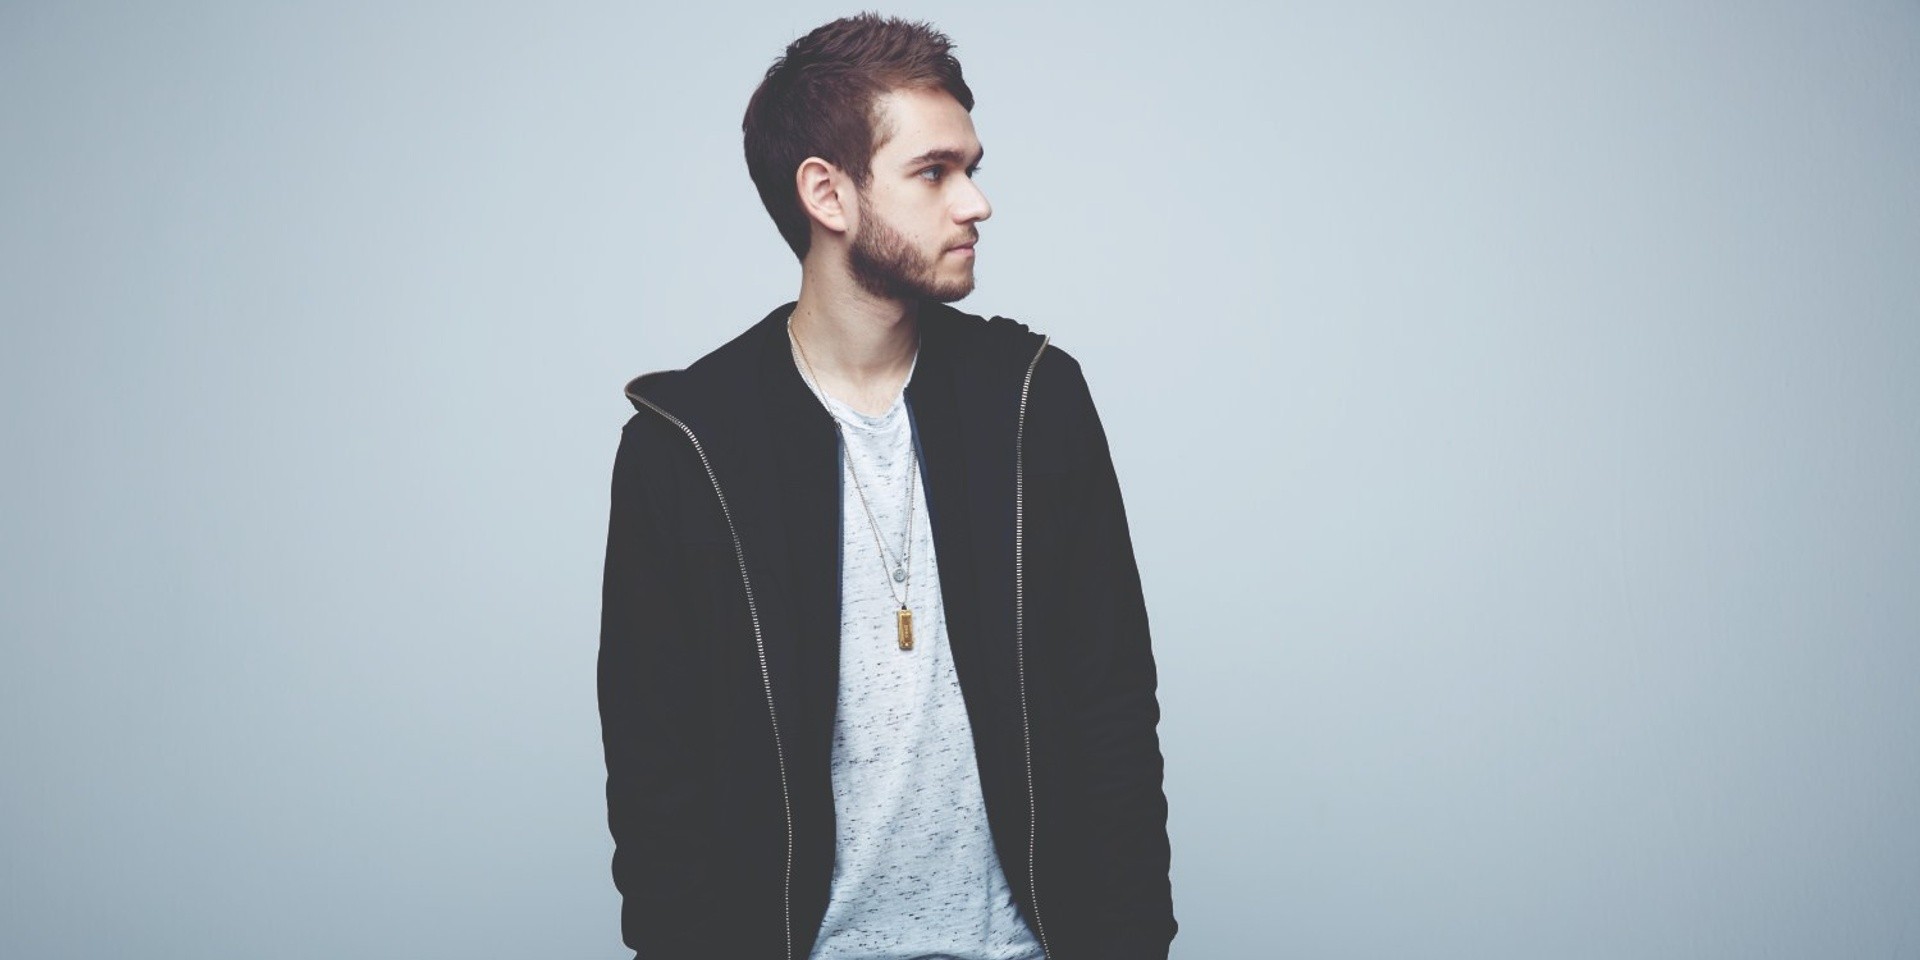 Zedd fans: here's your chance to choose your ideal setlists for his Asian shows